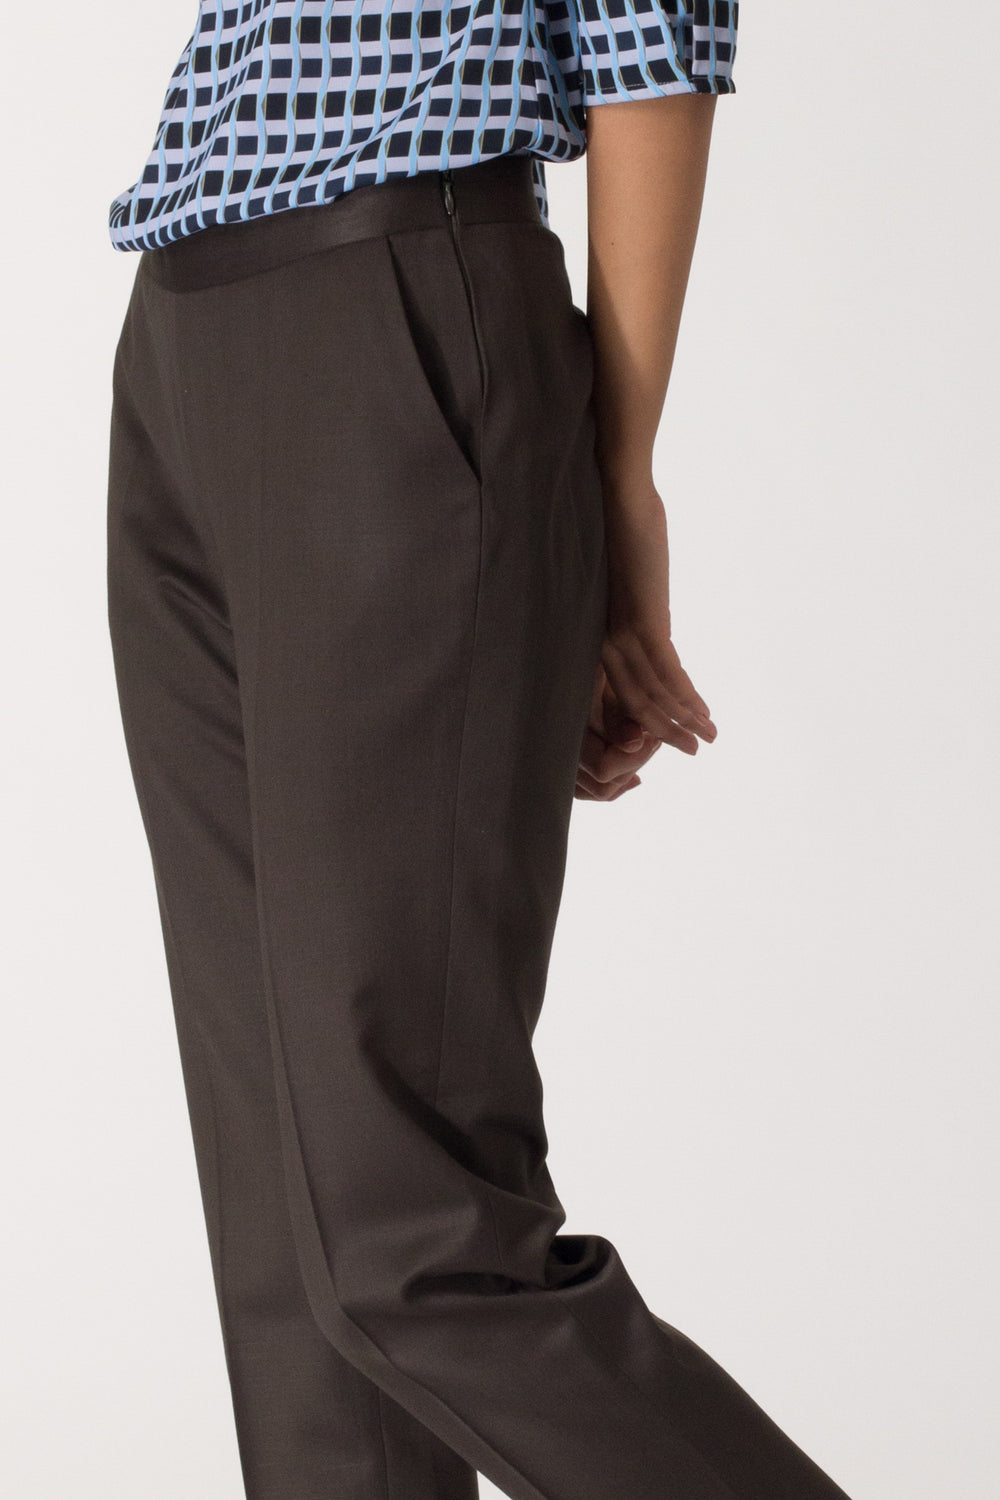 Well fitted, Smart, stylish women's formal pants and trousers for office. Shop online for all sizes including plus size formal trousers and pants at www.intermod.in